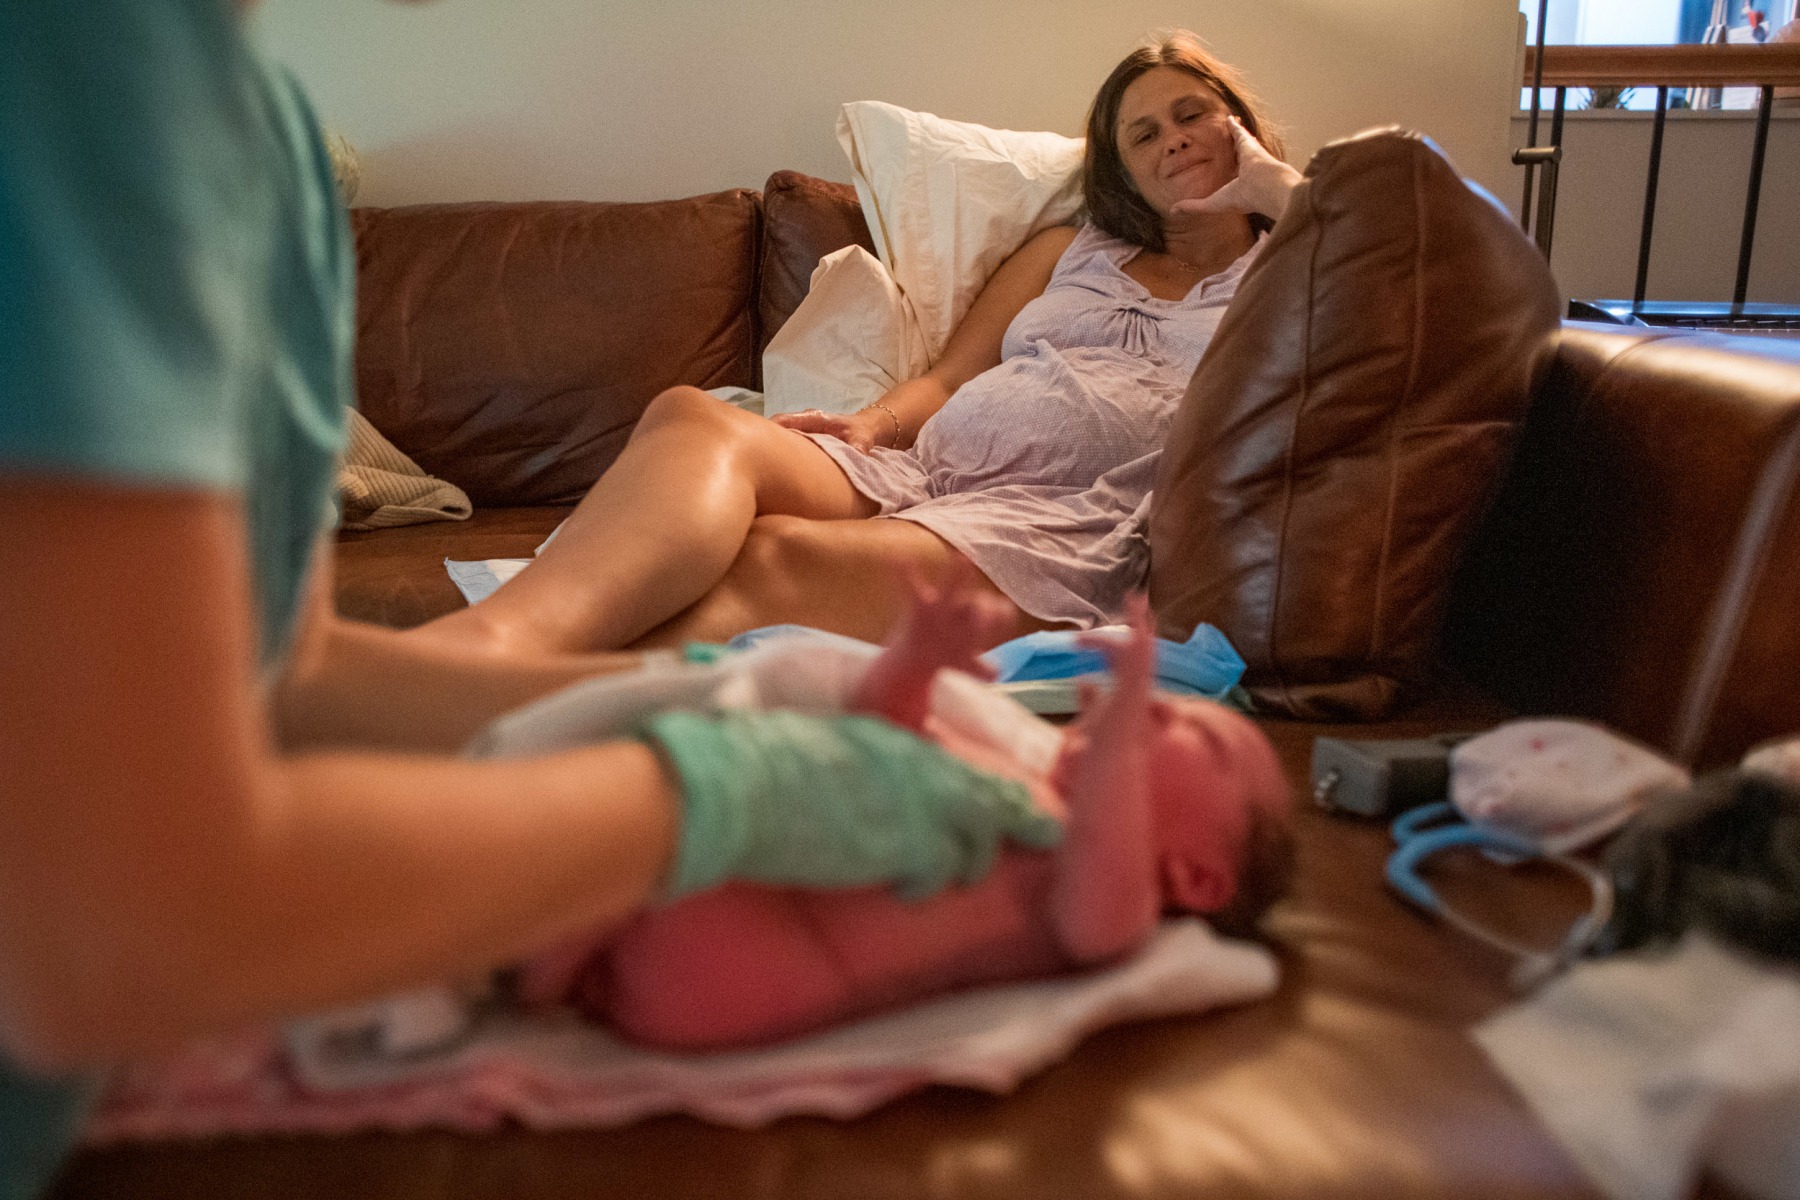 12:30am - After cleaning up and changing into fresh clothes, Kate looks at June while Lauren conducts a newborn exam. During the exam, Lauren checks her overall appearance and skin for common birth defects, as well as record her vitals and measurements.